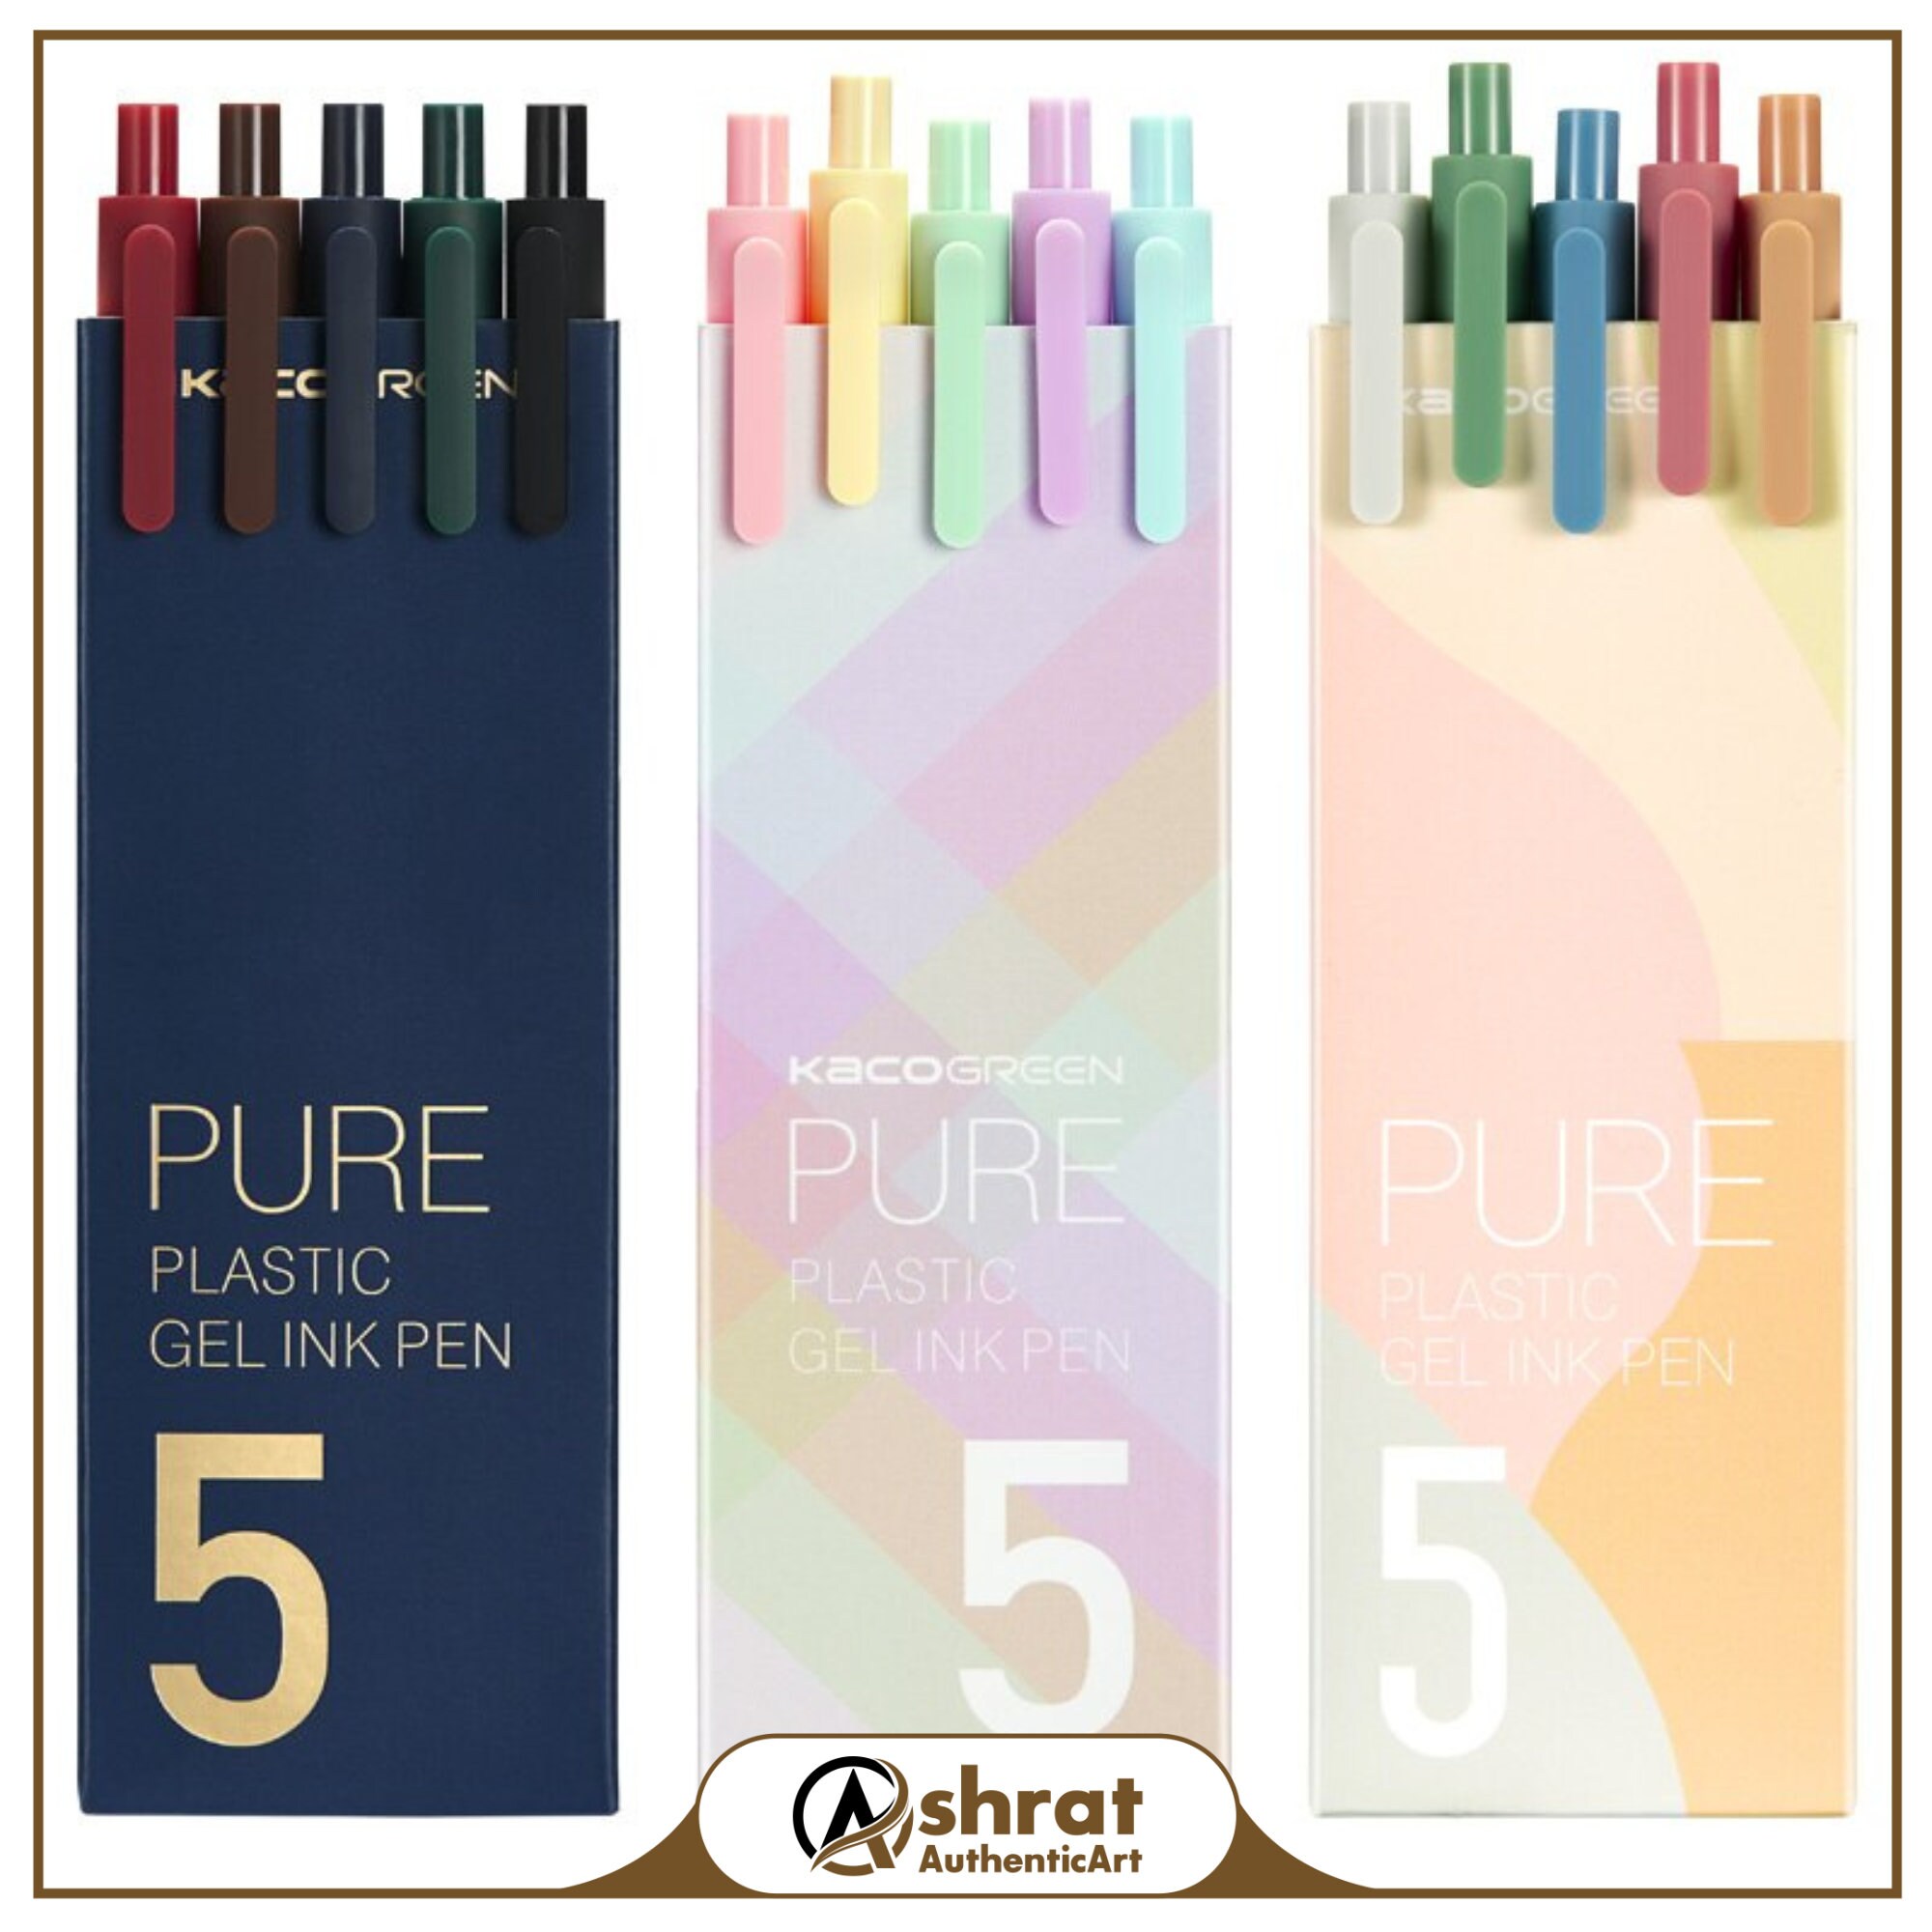 Copic Pale Pastels Alcohol Sketch Brush Markers Set of 6, Brand New. 